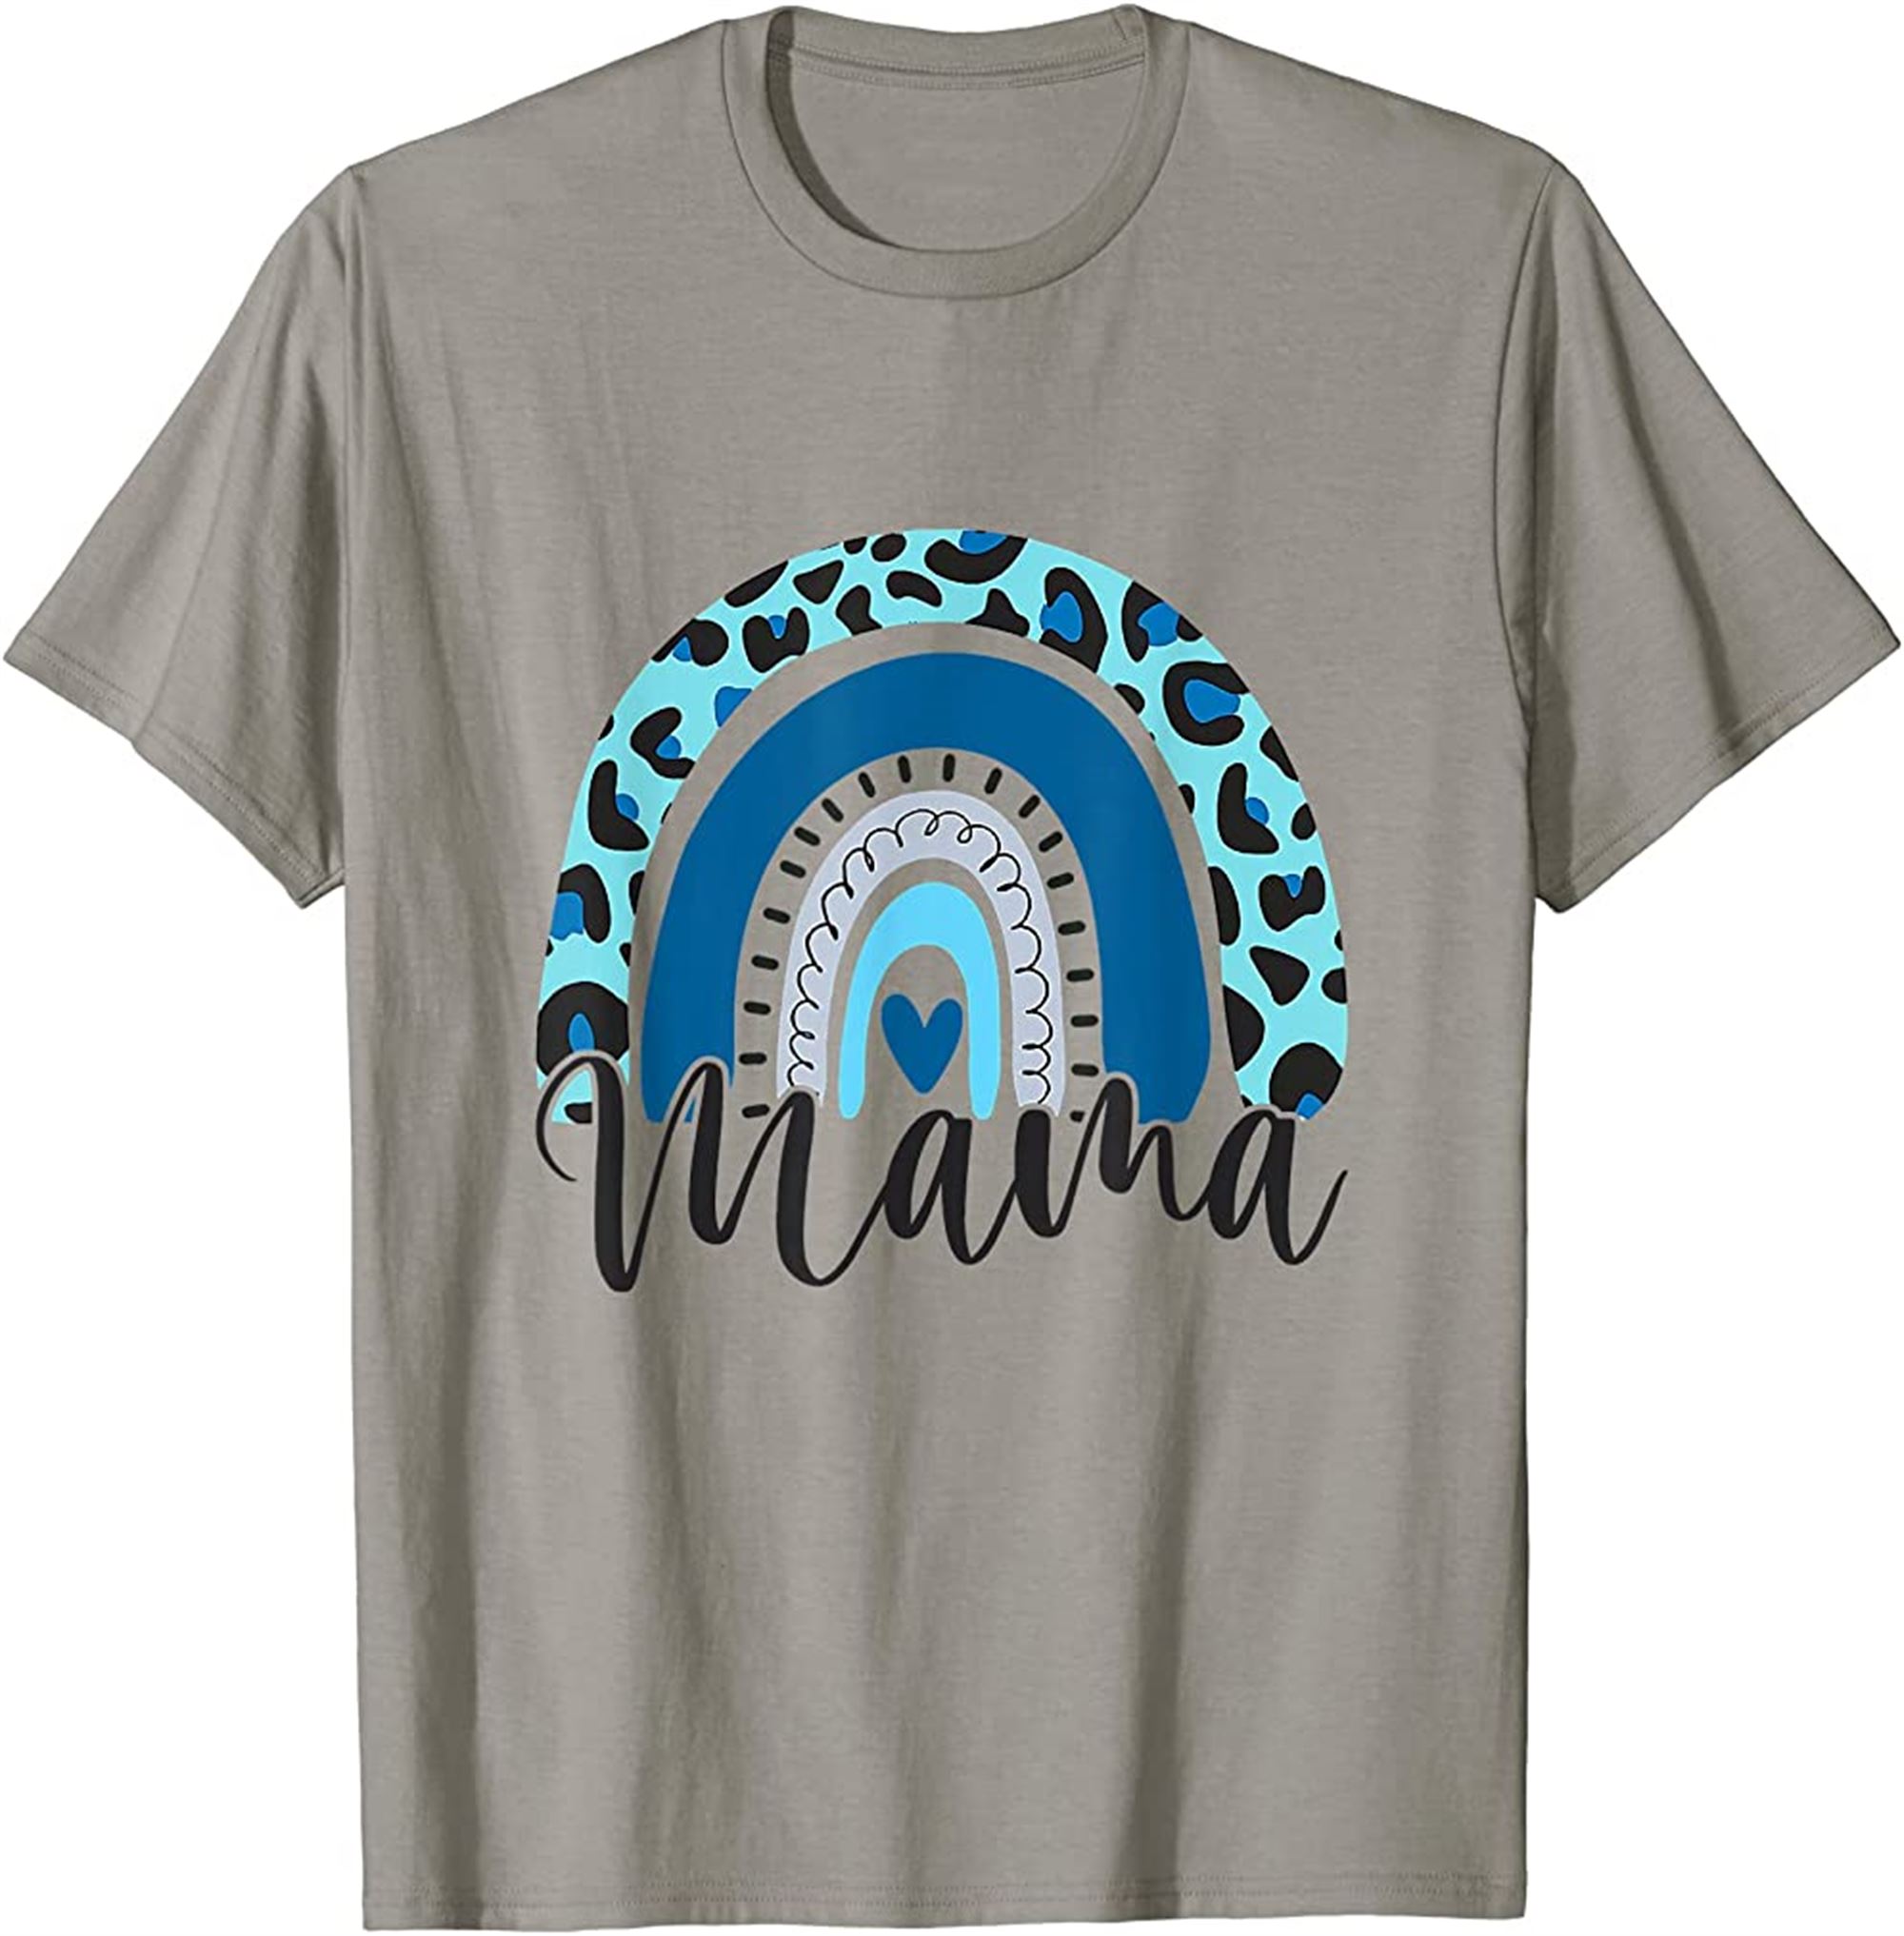 Blessed Mama Funny Leopard Boho Rainbow T-shirt Full Size Up To 5xl